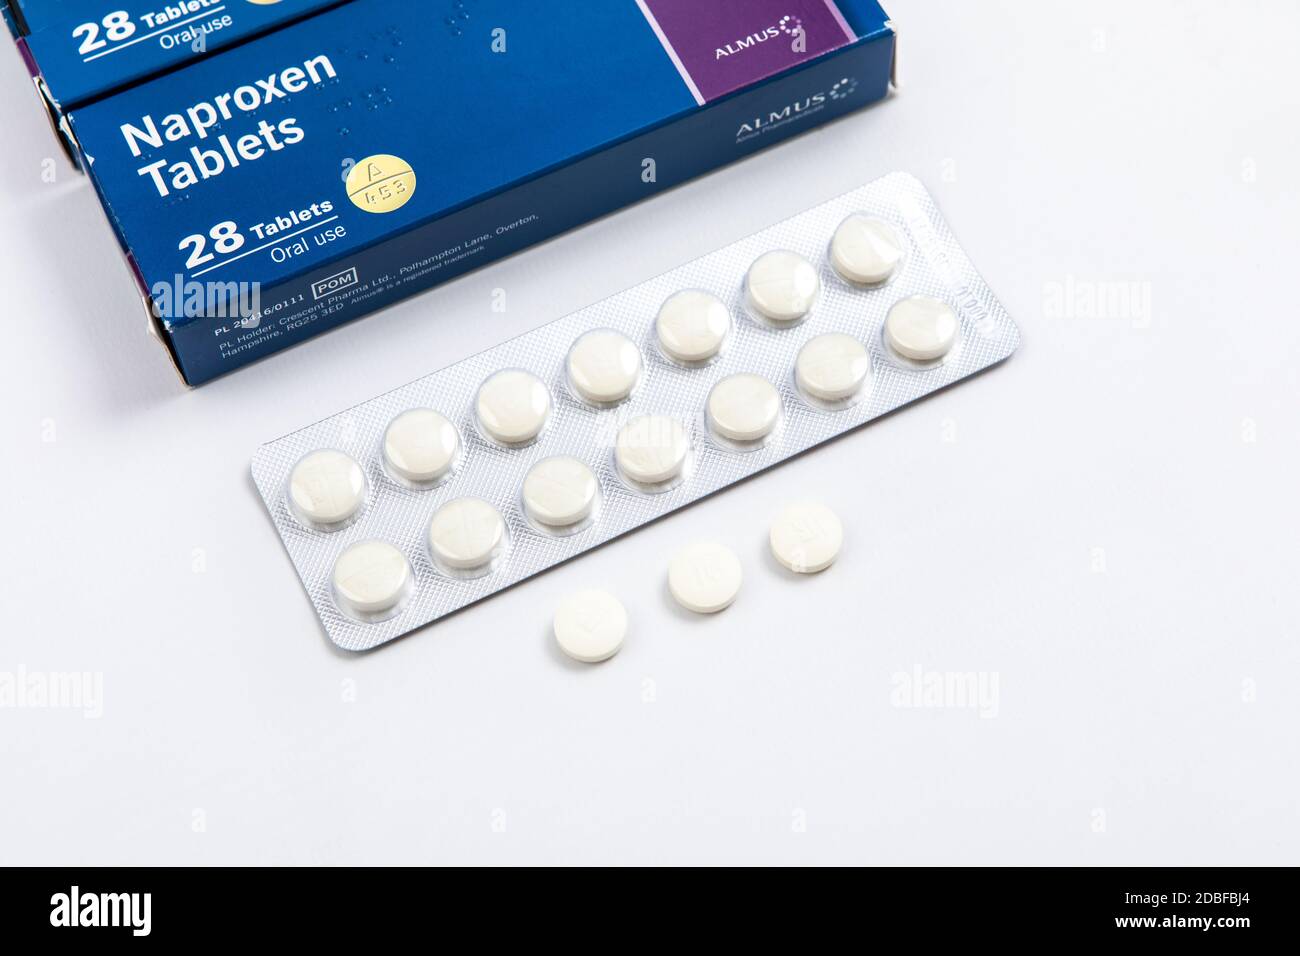 Still life photograph of Naproxen 250mg and Lansoprazole 30mg  gastro-resistant capsules Stock Photo - Alamy